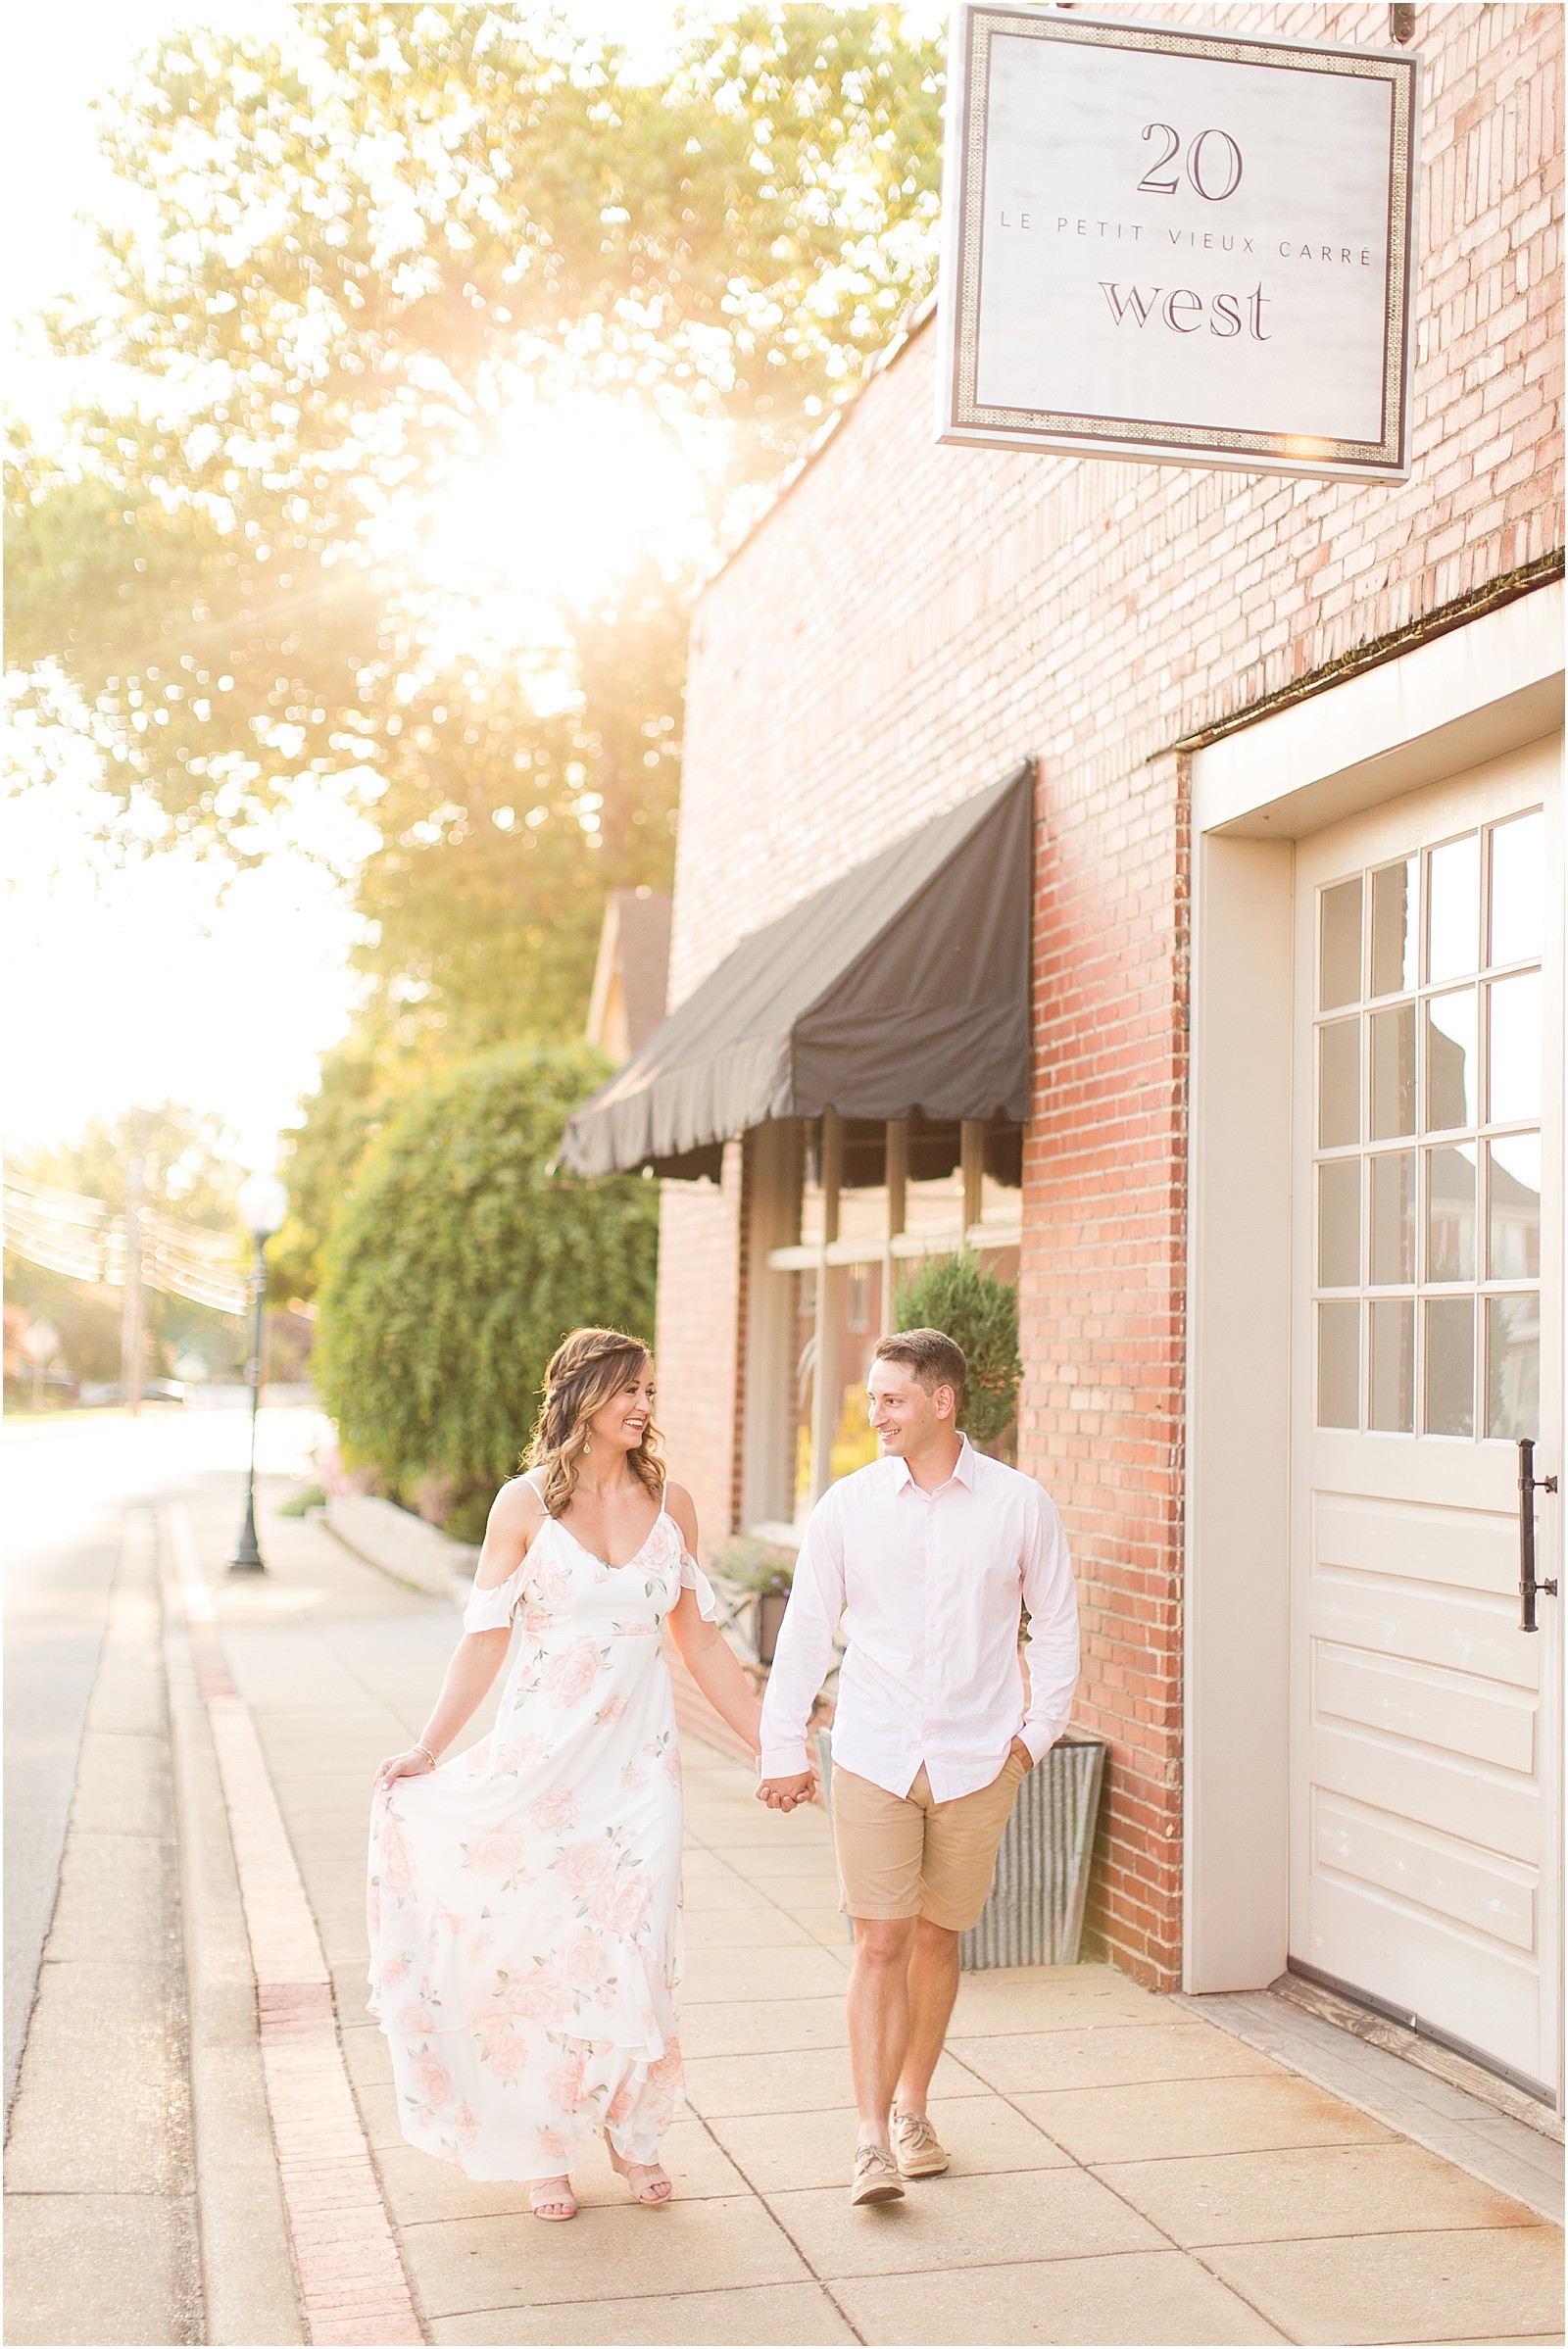 20 West Downtown Newburgh Anniversary Session | Katie and Bobby | Bret and Brandie Photography 003.jpg